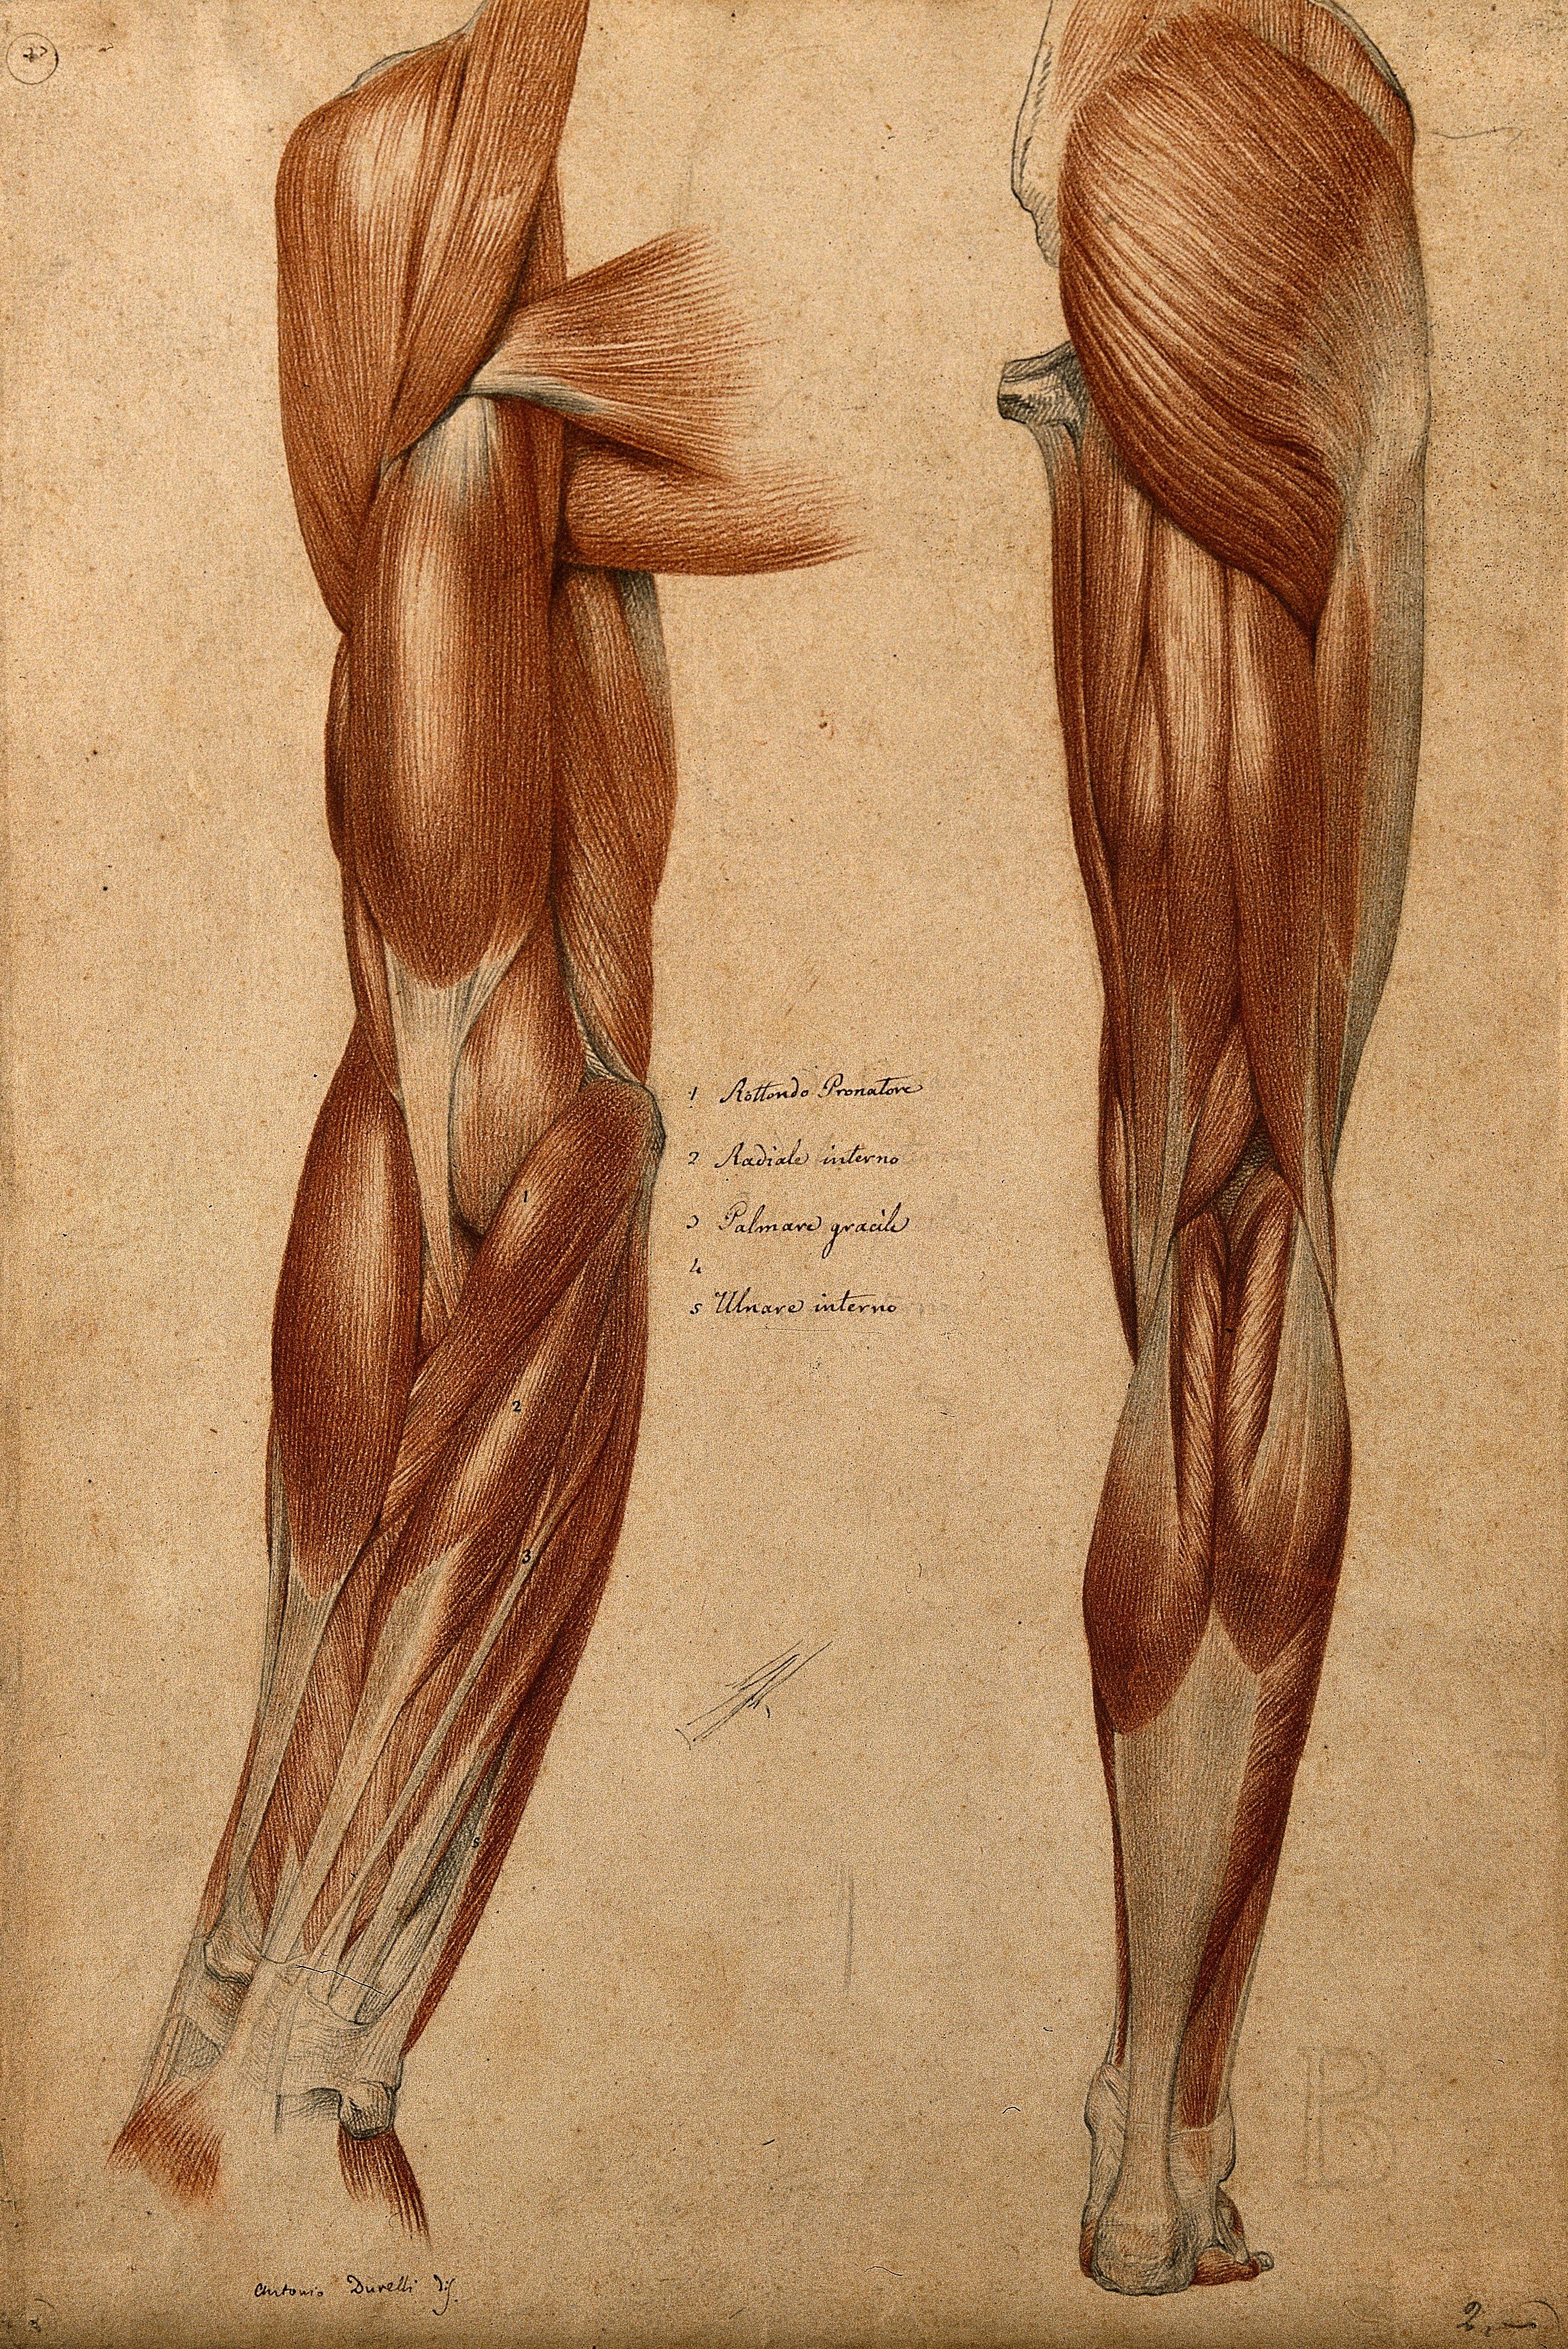  https://upload.wikimedia.org/wikipedia/commons/4/4f/Muscles_and_tendons_of_the_arm_and_leg%3B_two_%C3%A9corch%C3%A9_figures._Wellcome_V0008256.jpg 